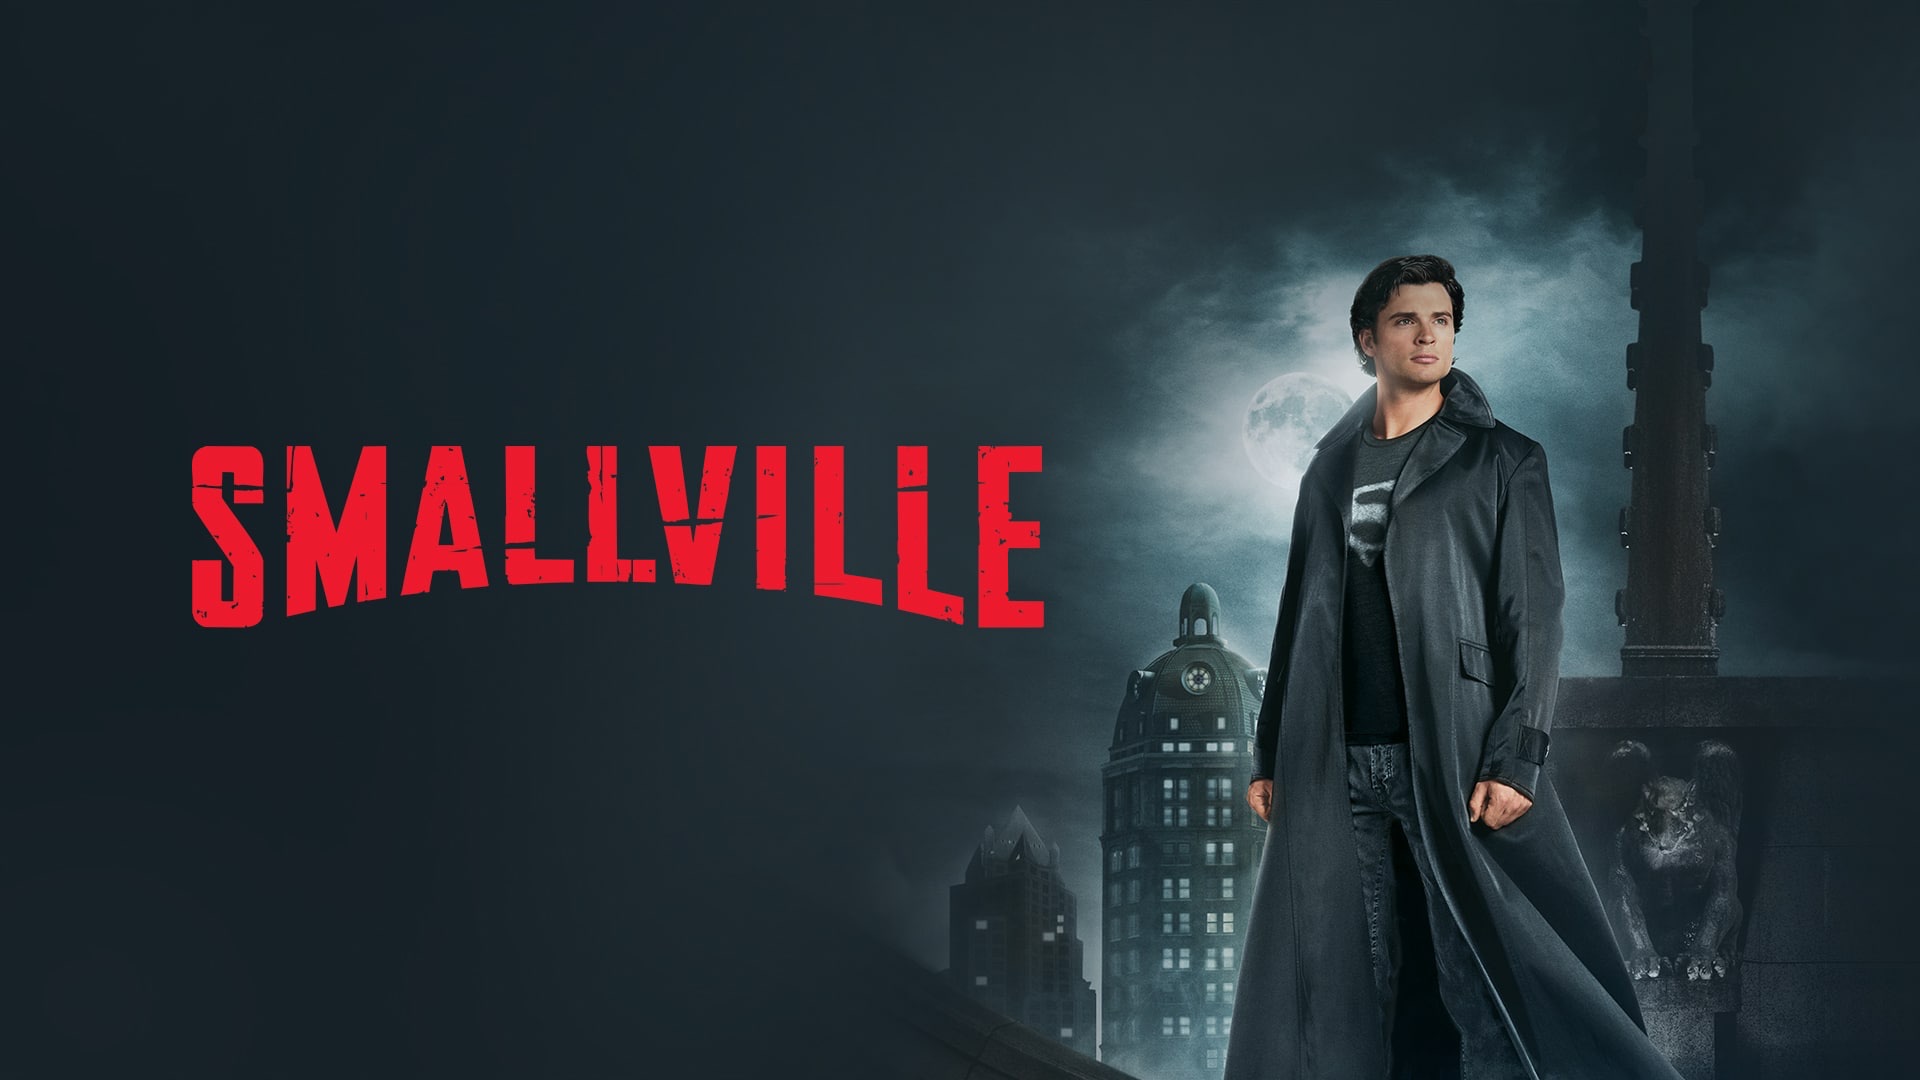 Smallville 4K wallpapers for your desktop or mobile screen free and easy to  download